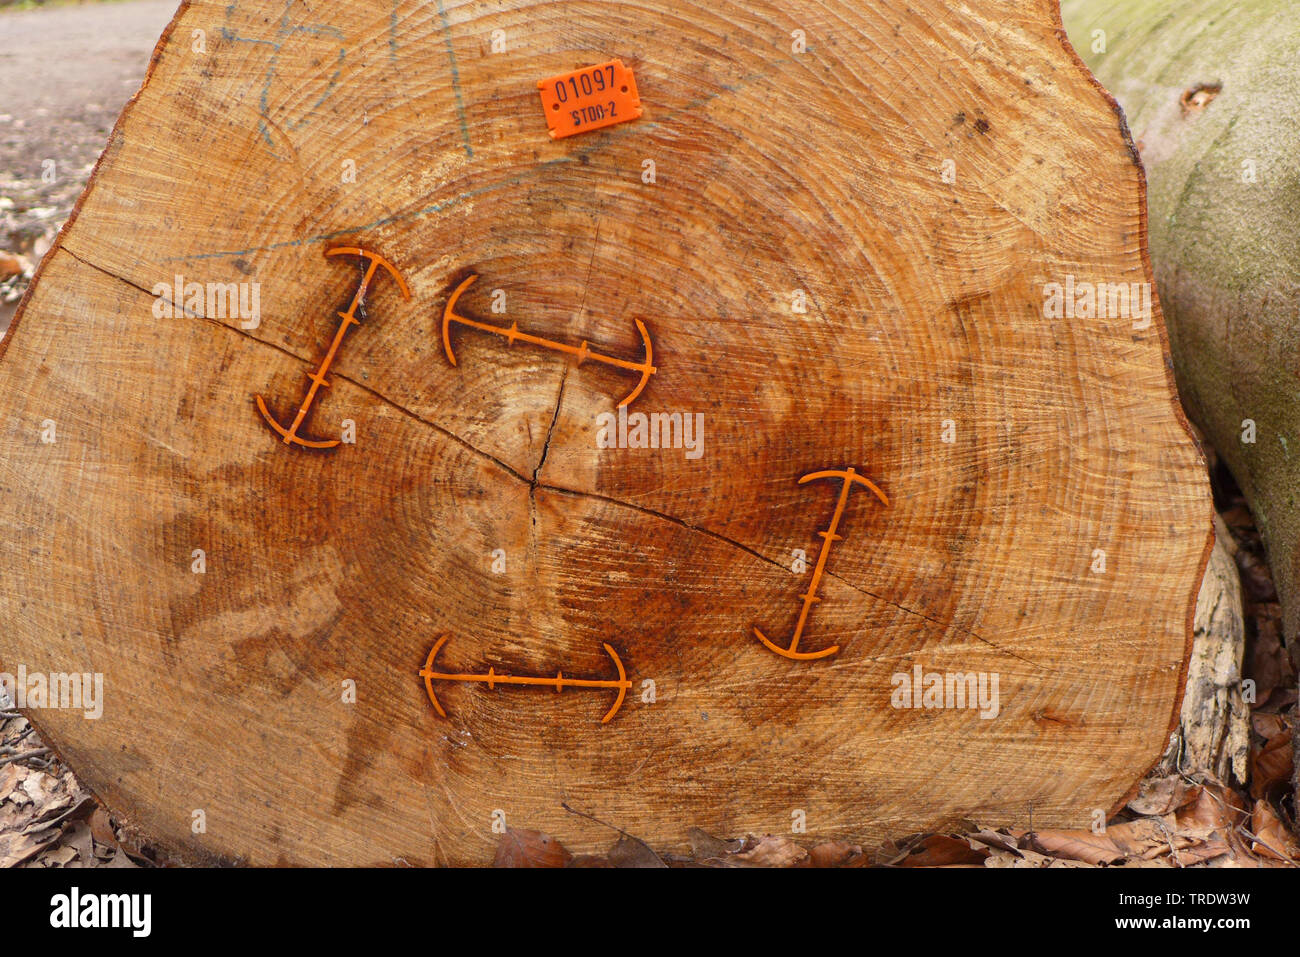 common beech (Fagus sylvatica), sliced trunk with clips to avoid cracks in the wood, Germany Stock Photo